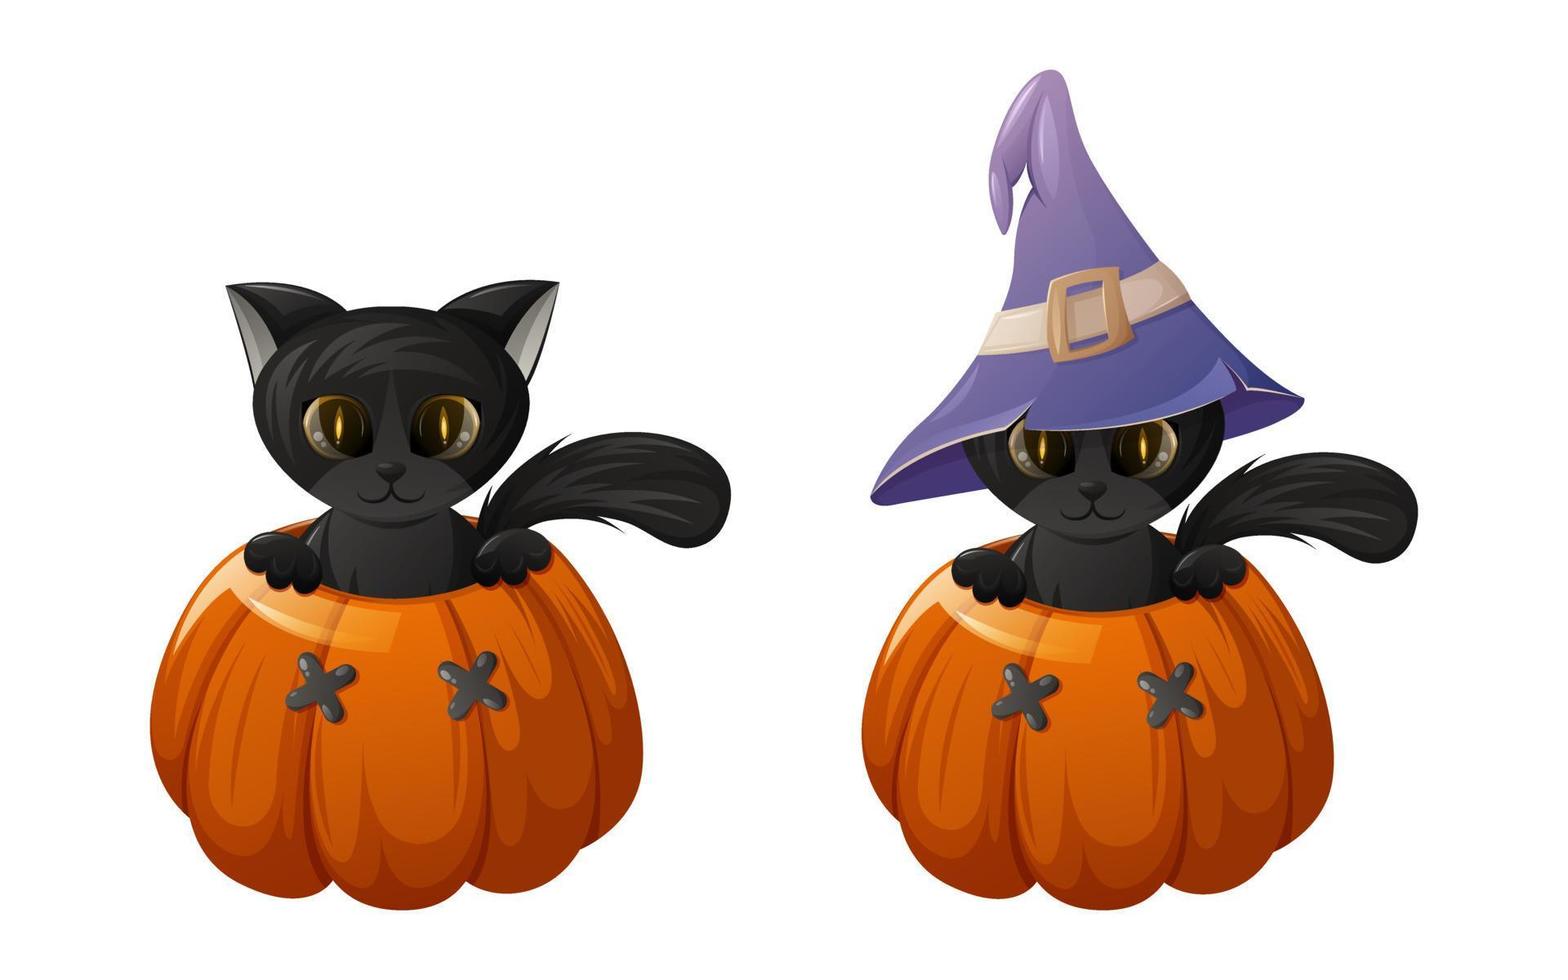 Cute black cat with and without sorcery hat is inside a pumpkin with funny face. Cartoon vector illustration for halloween.